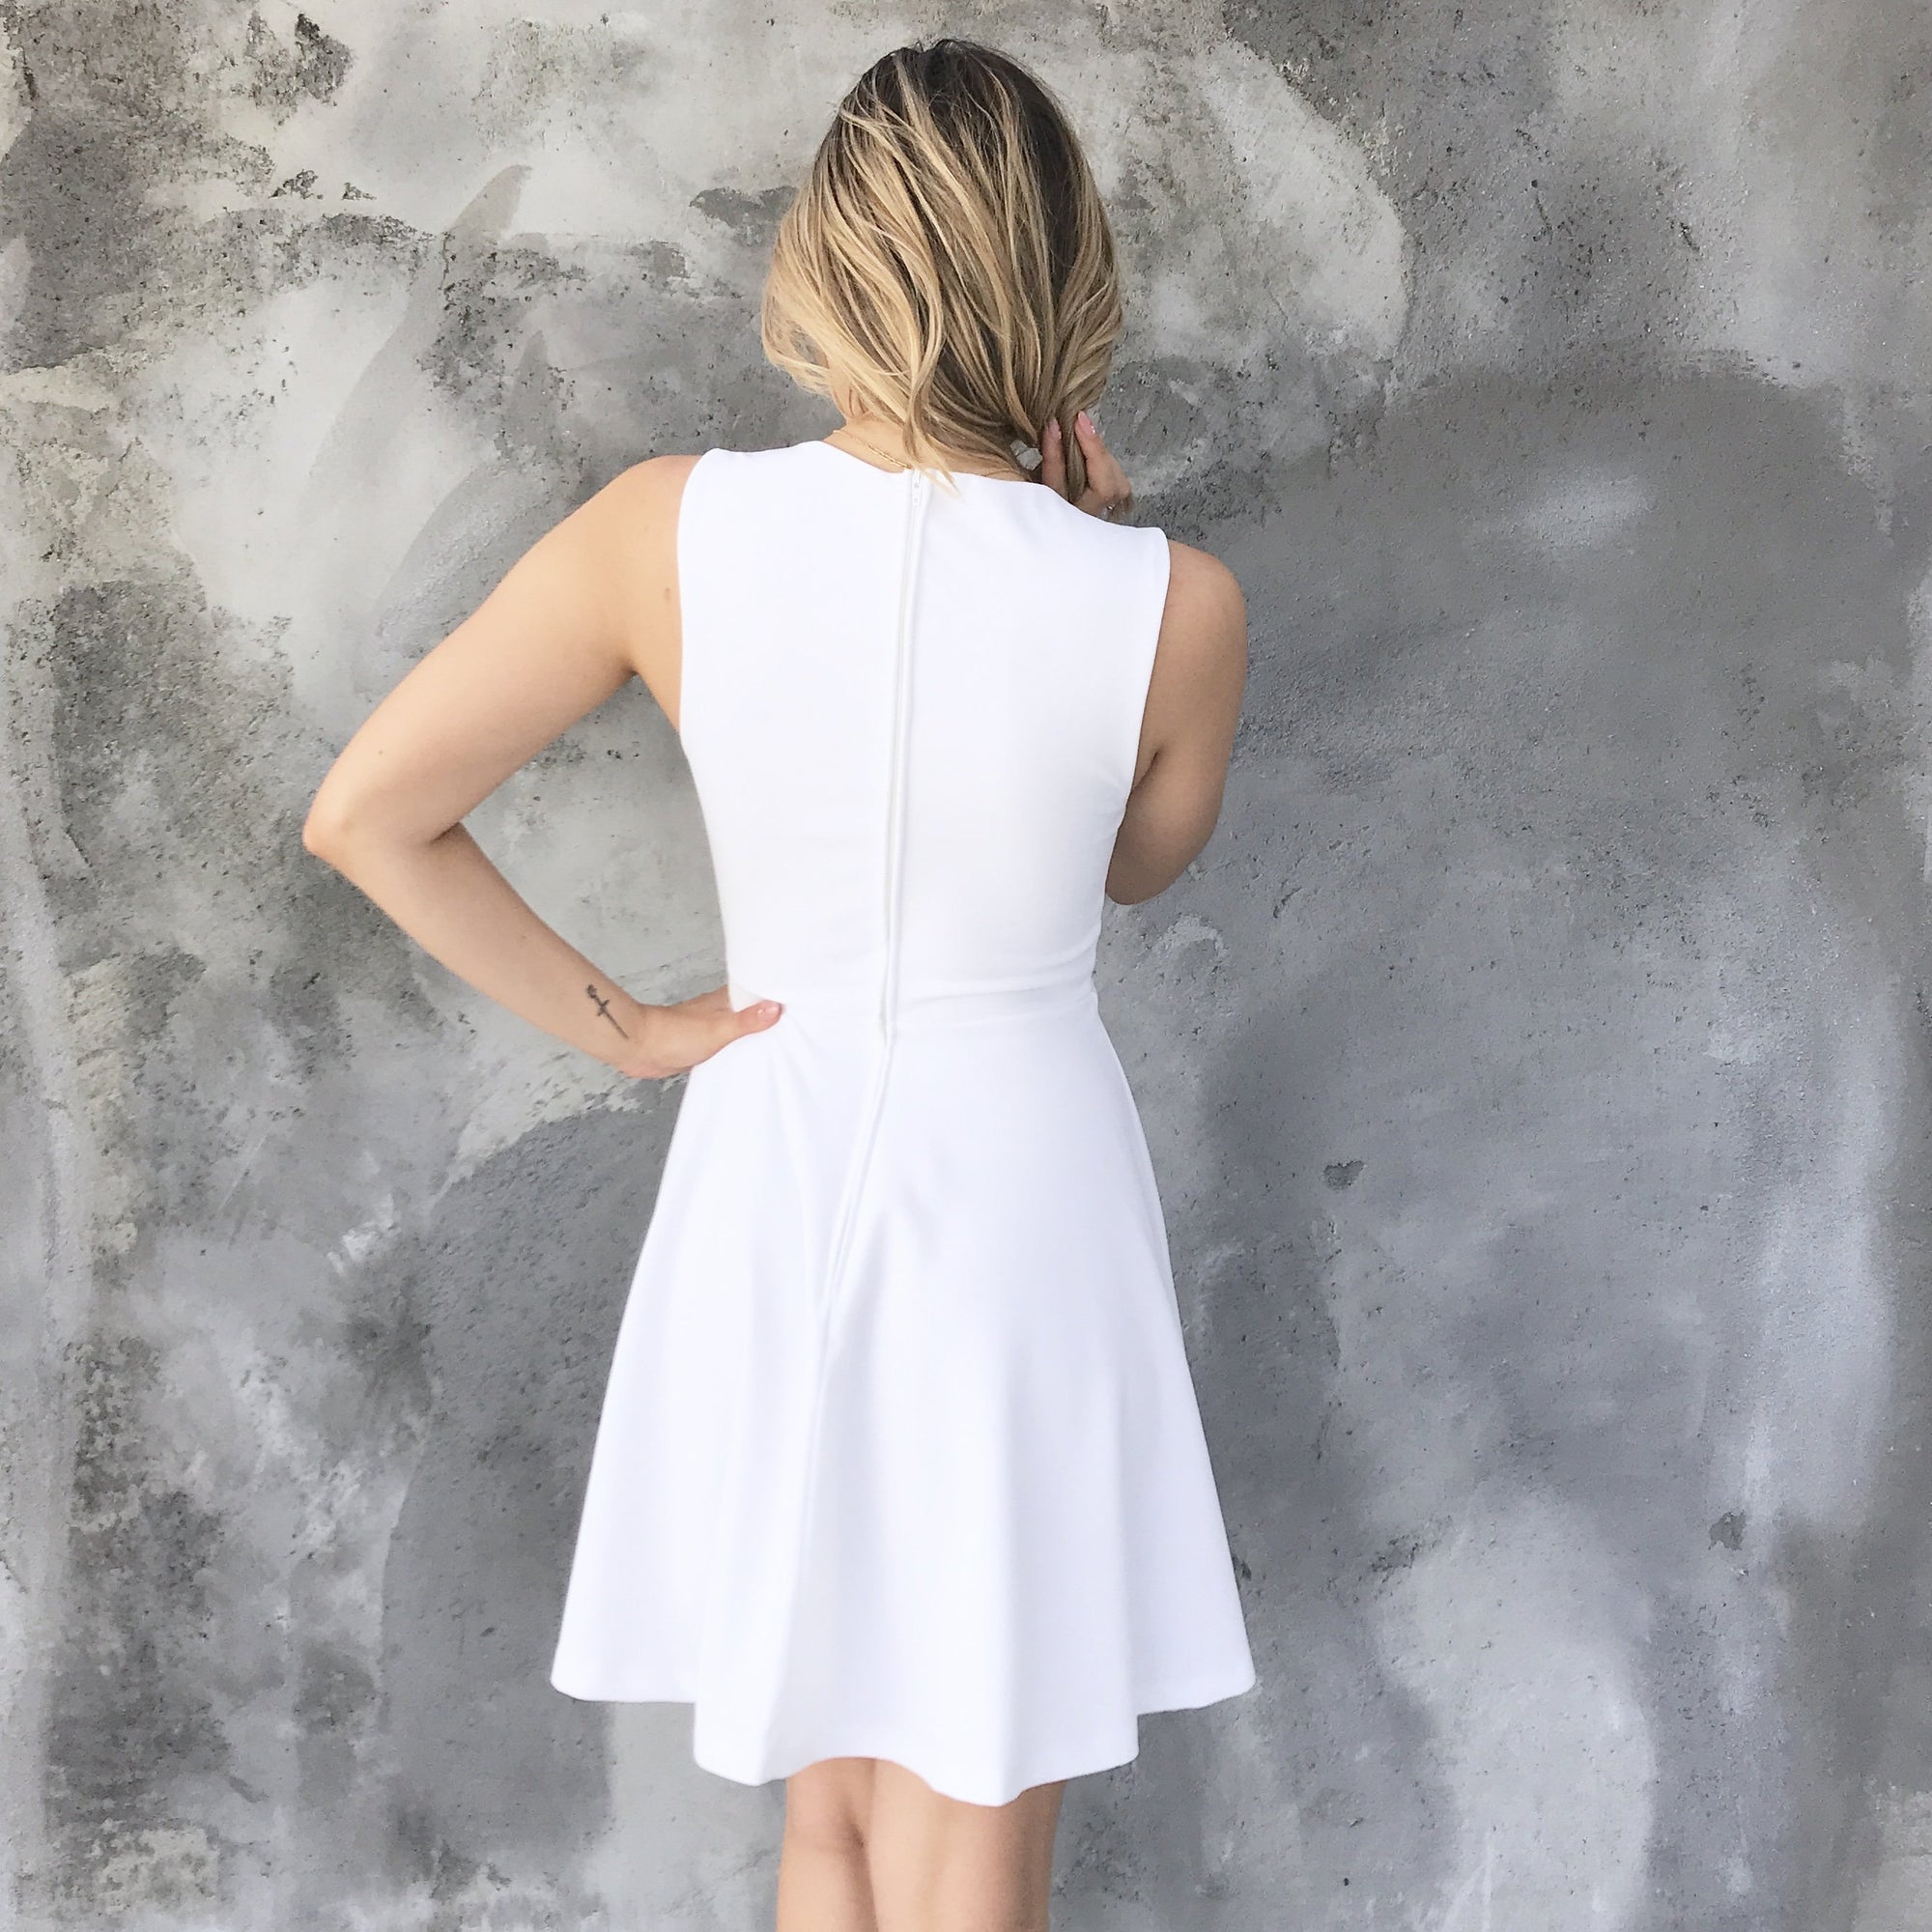 Picture Perfect White Skater Dress - Dainty Hooligan